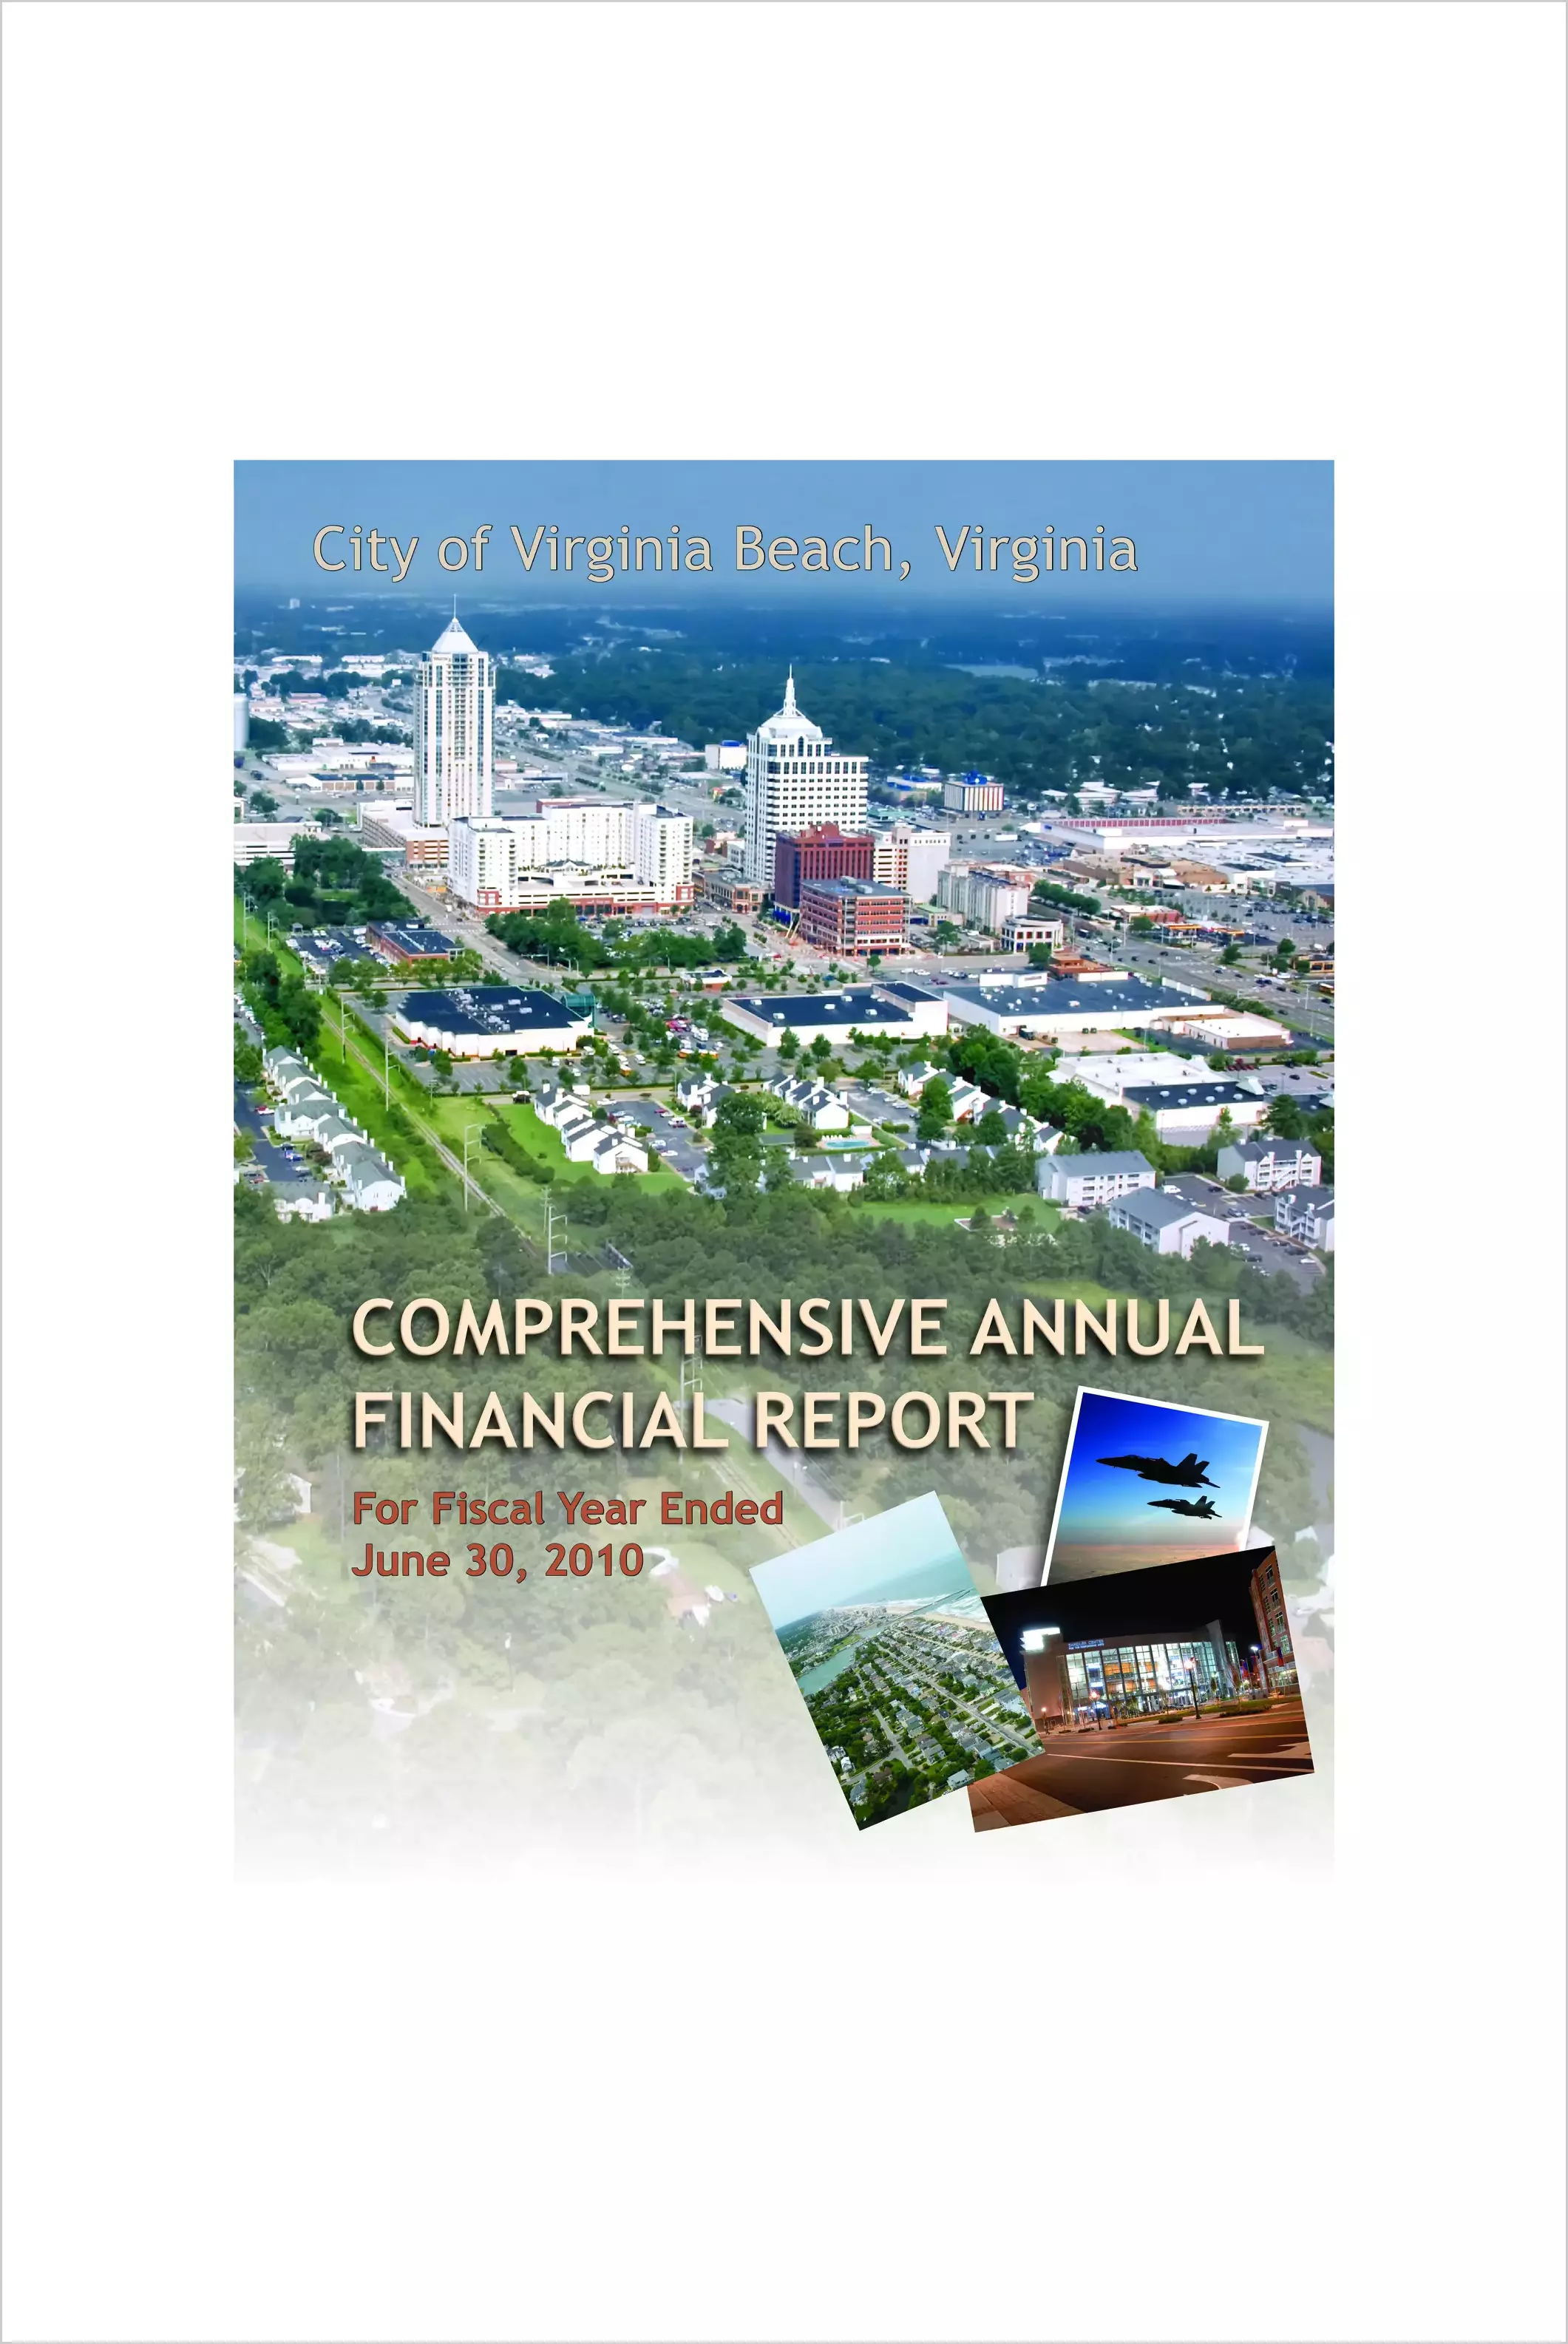 2010 Annual Financial Report for City of Virginia Beach